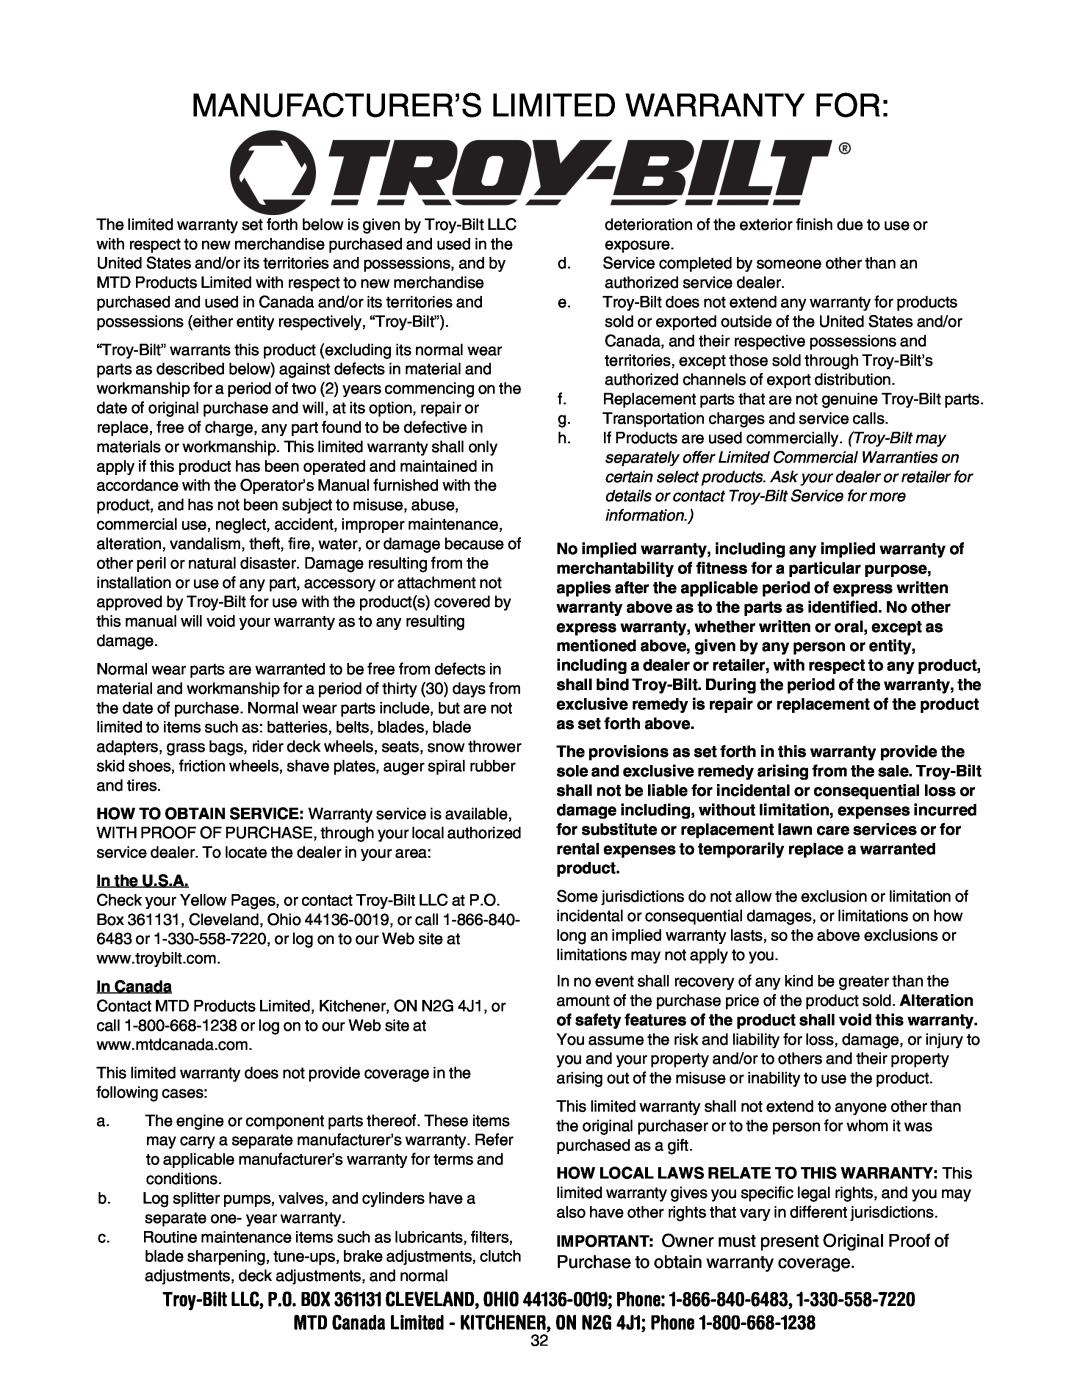 Troy-Bilt 10530 Manufacturer’S Limited Warranty For, In the U.S.A, In Canada, HOW LOCAL LAWS RELATE TO THIS WARRANTY This 